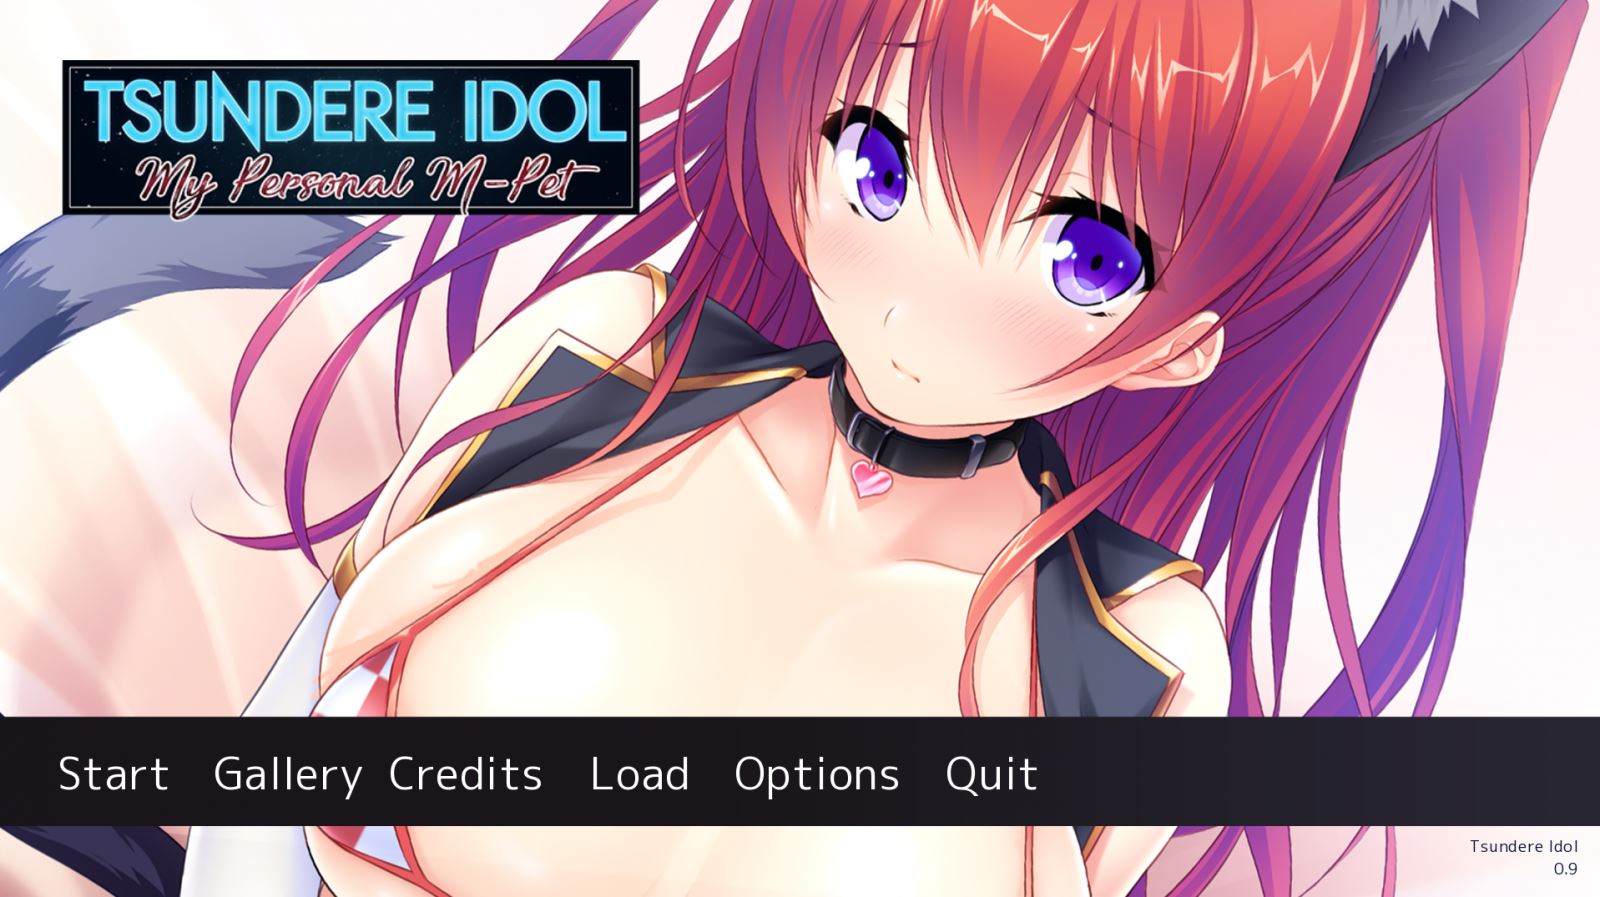 Tsundere Idol: My Personal M-Pet porn xxx game download cover